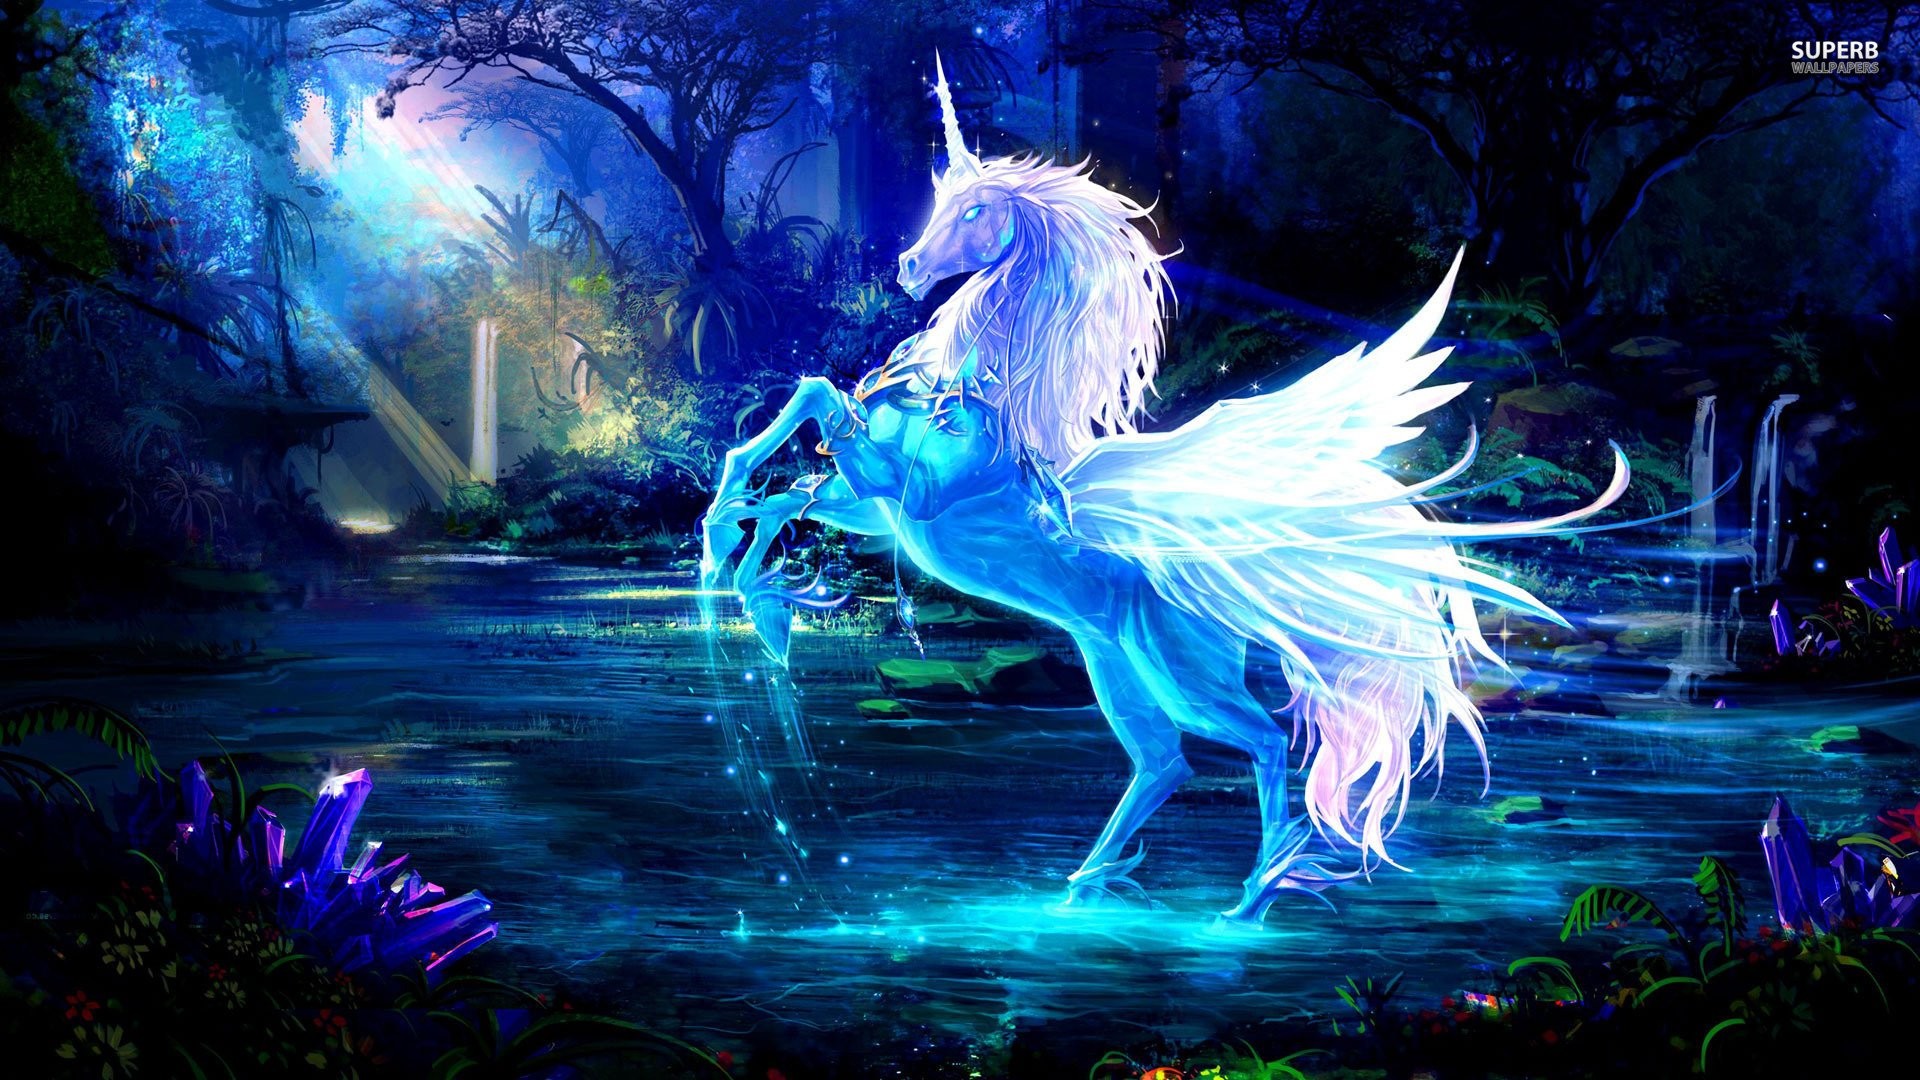 Wallpaper Cute Unicorn with high-resolution 1920x1080 pixel. You can use this wallpaper for your Windows and Mac OS computers as well as your Android and iPhone smartphones